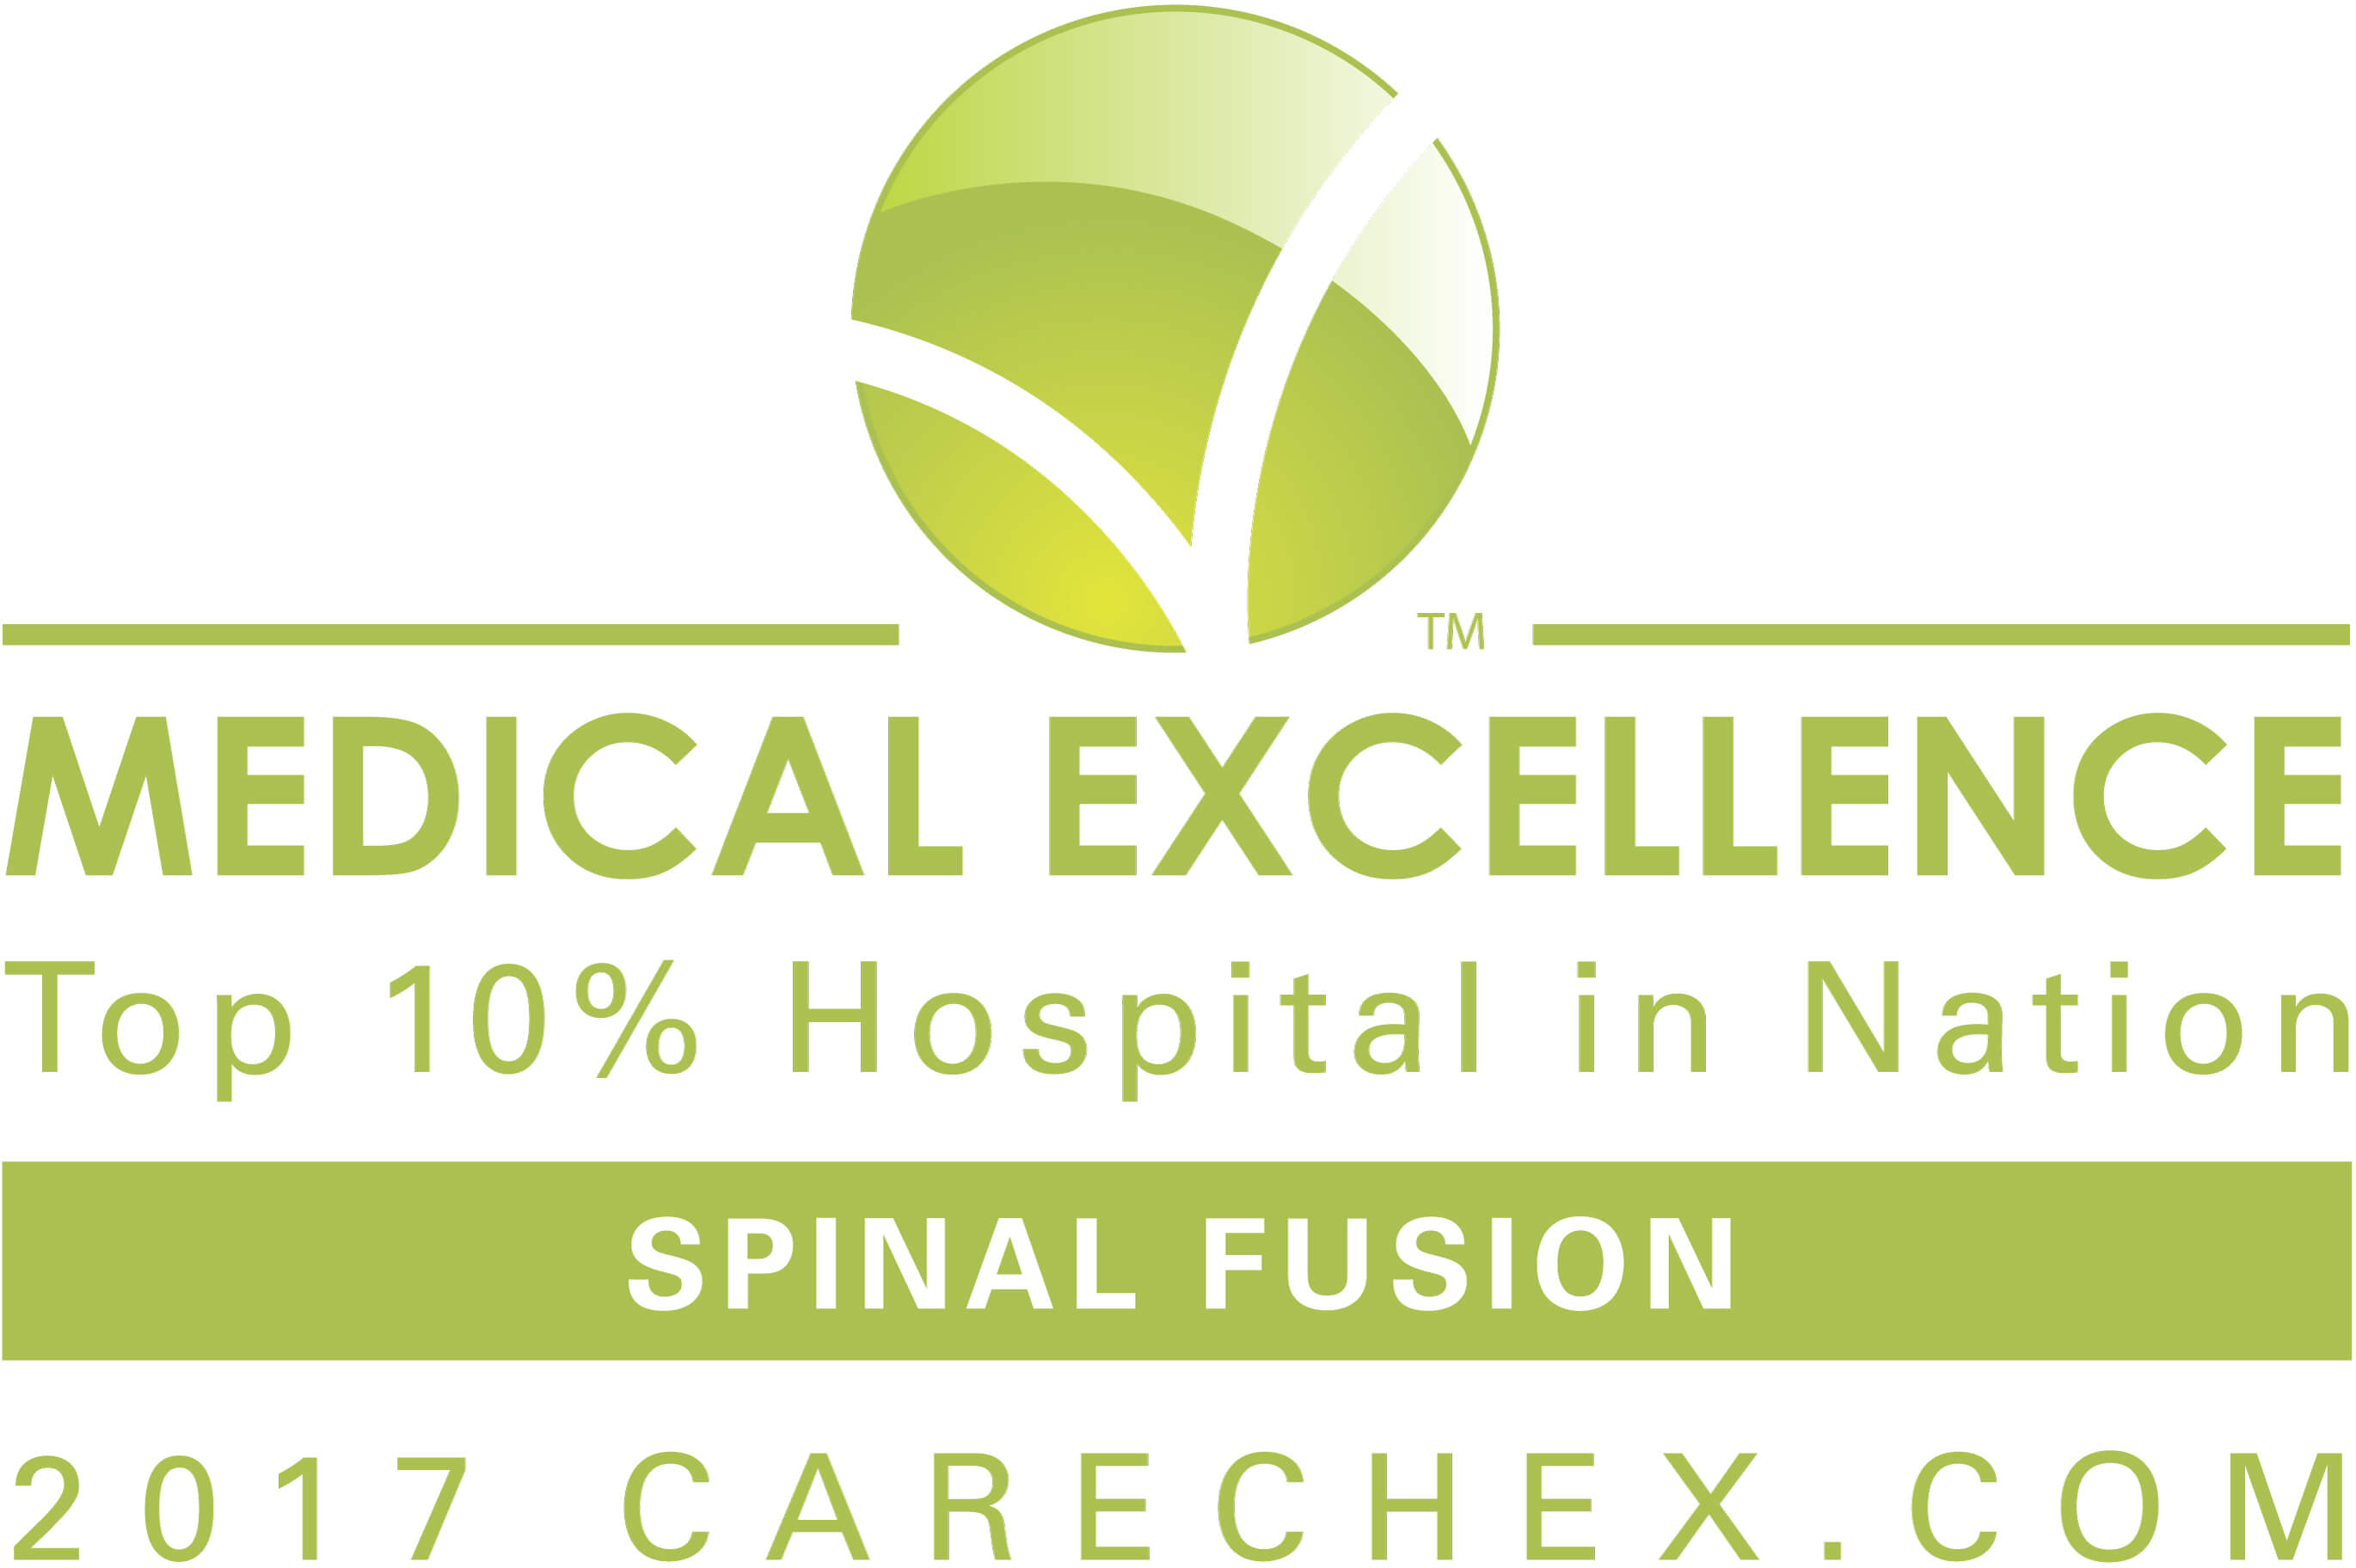 2017 CareCheck Top 10% Hospitals in Nation for Medical Excellence - Spinal Fusion